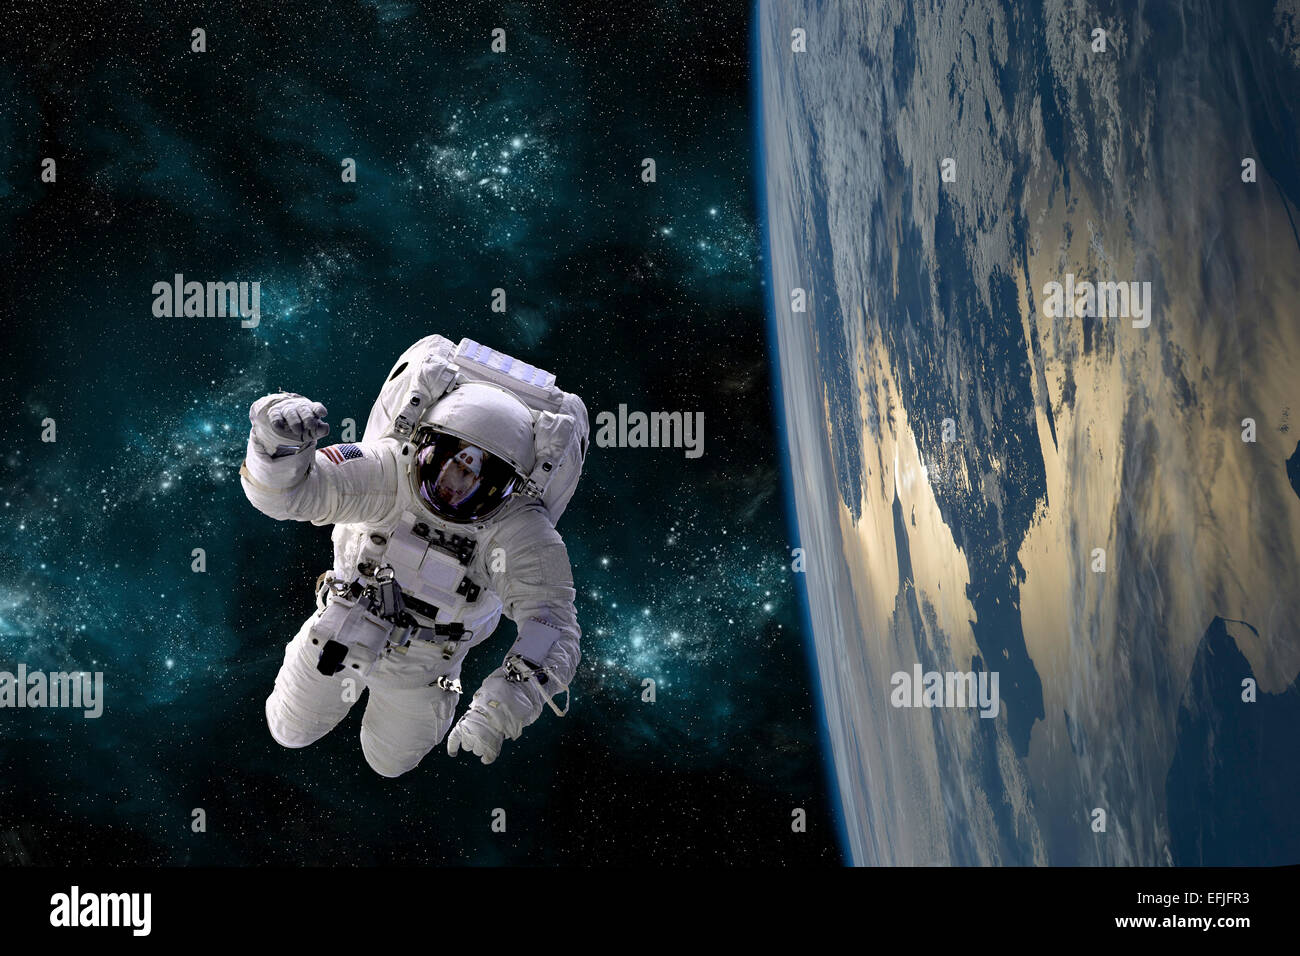 An artist's depiction of an astronaut floating in space while orbiting a large, Earth-like planet. Stock Photo